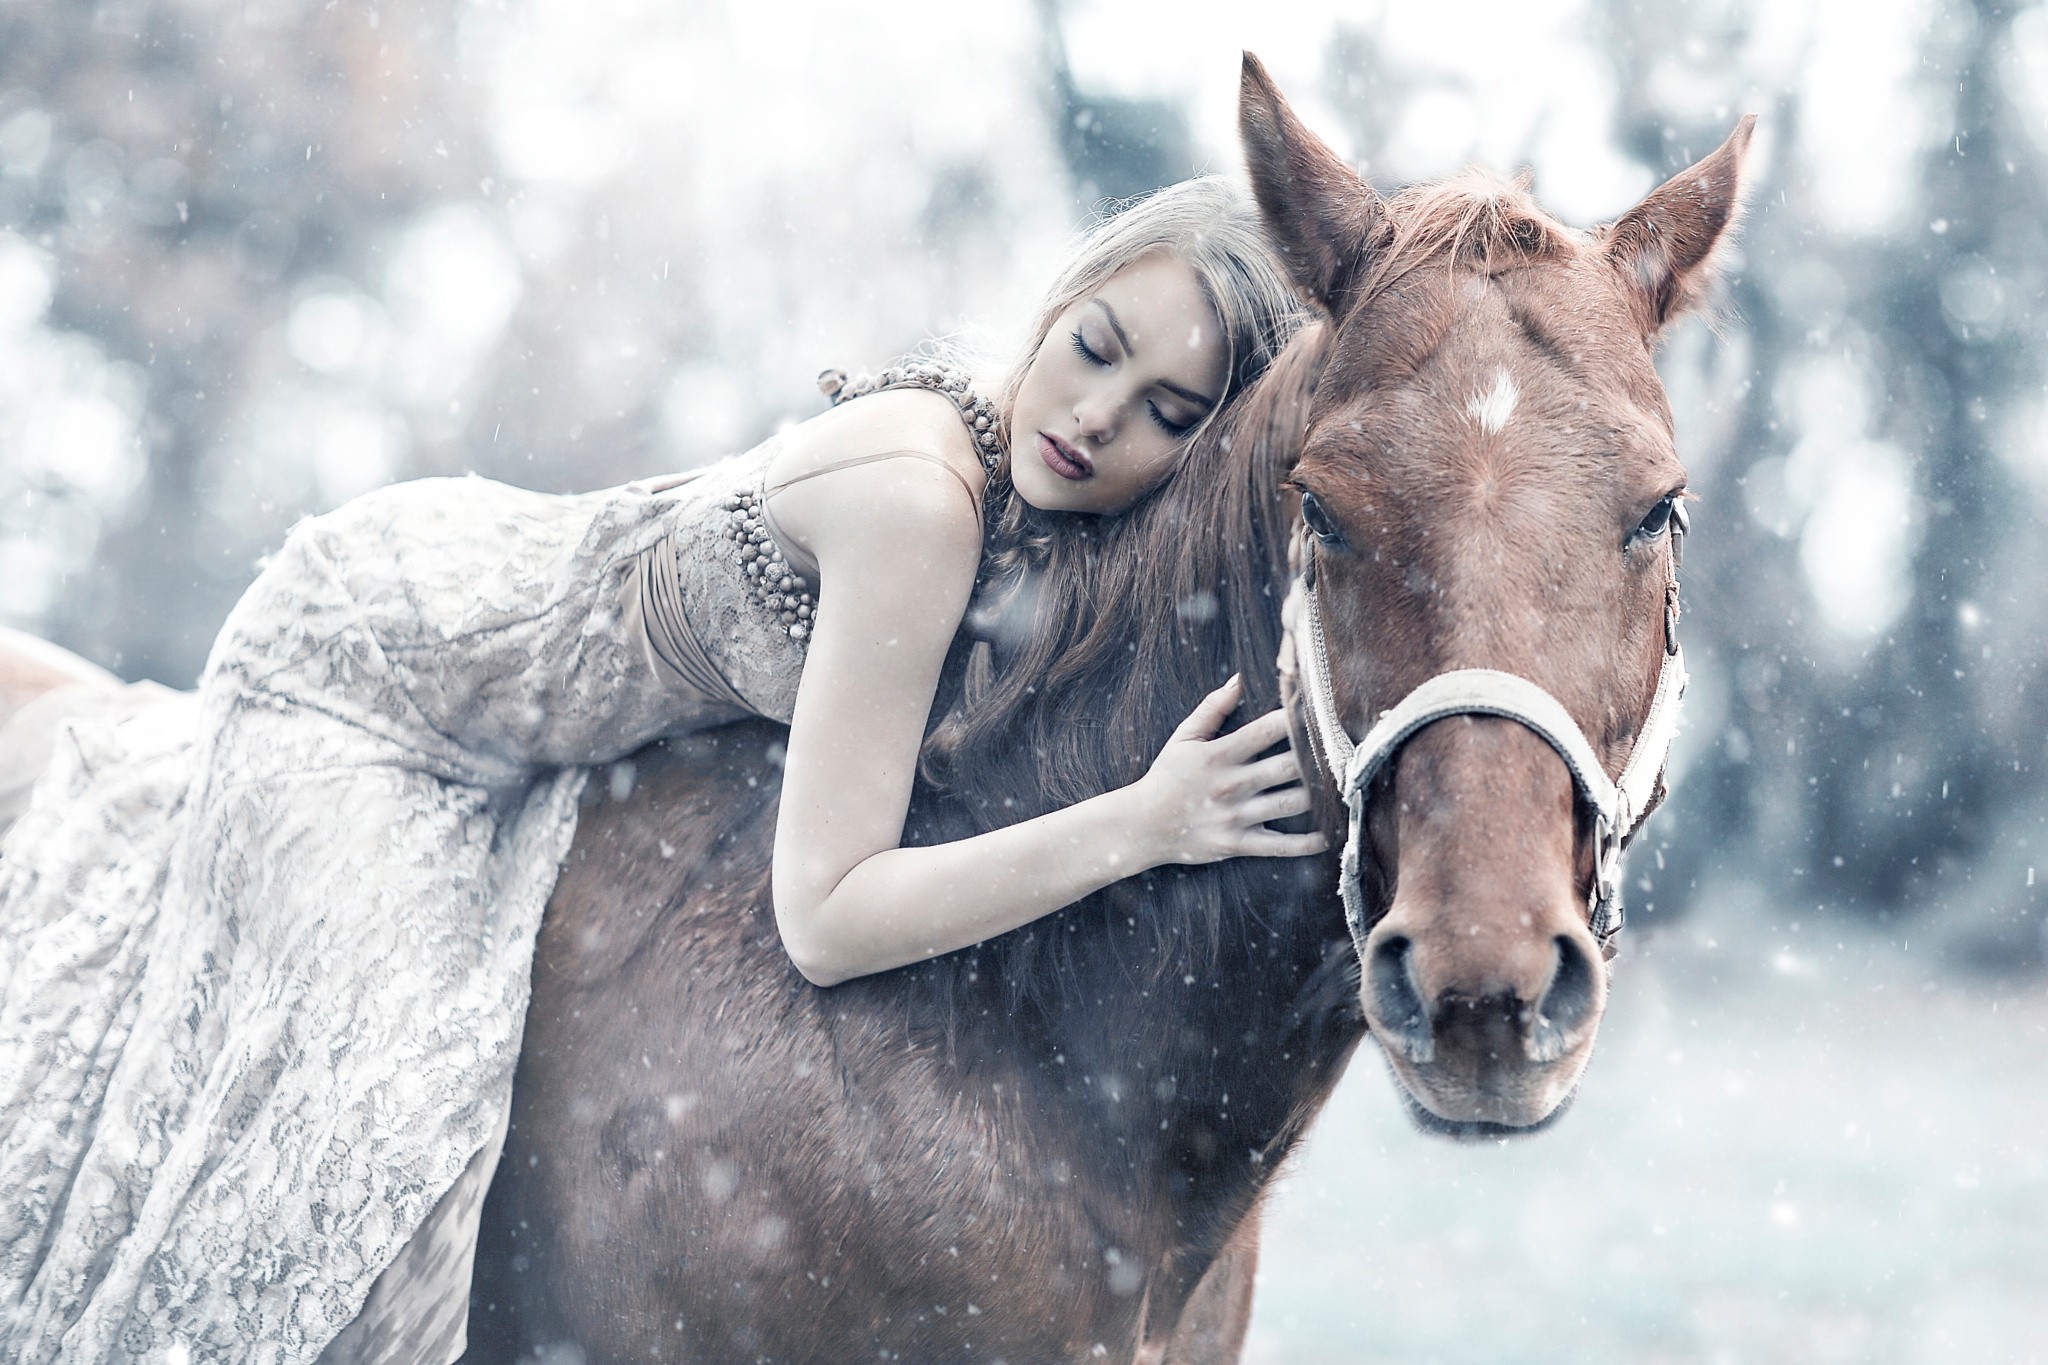 People 2048x1365 horse women model animals women with horse women outdoors outdoors mammals dress closed eyes cold